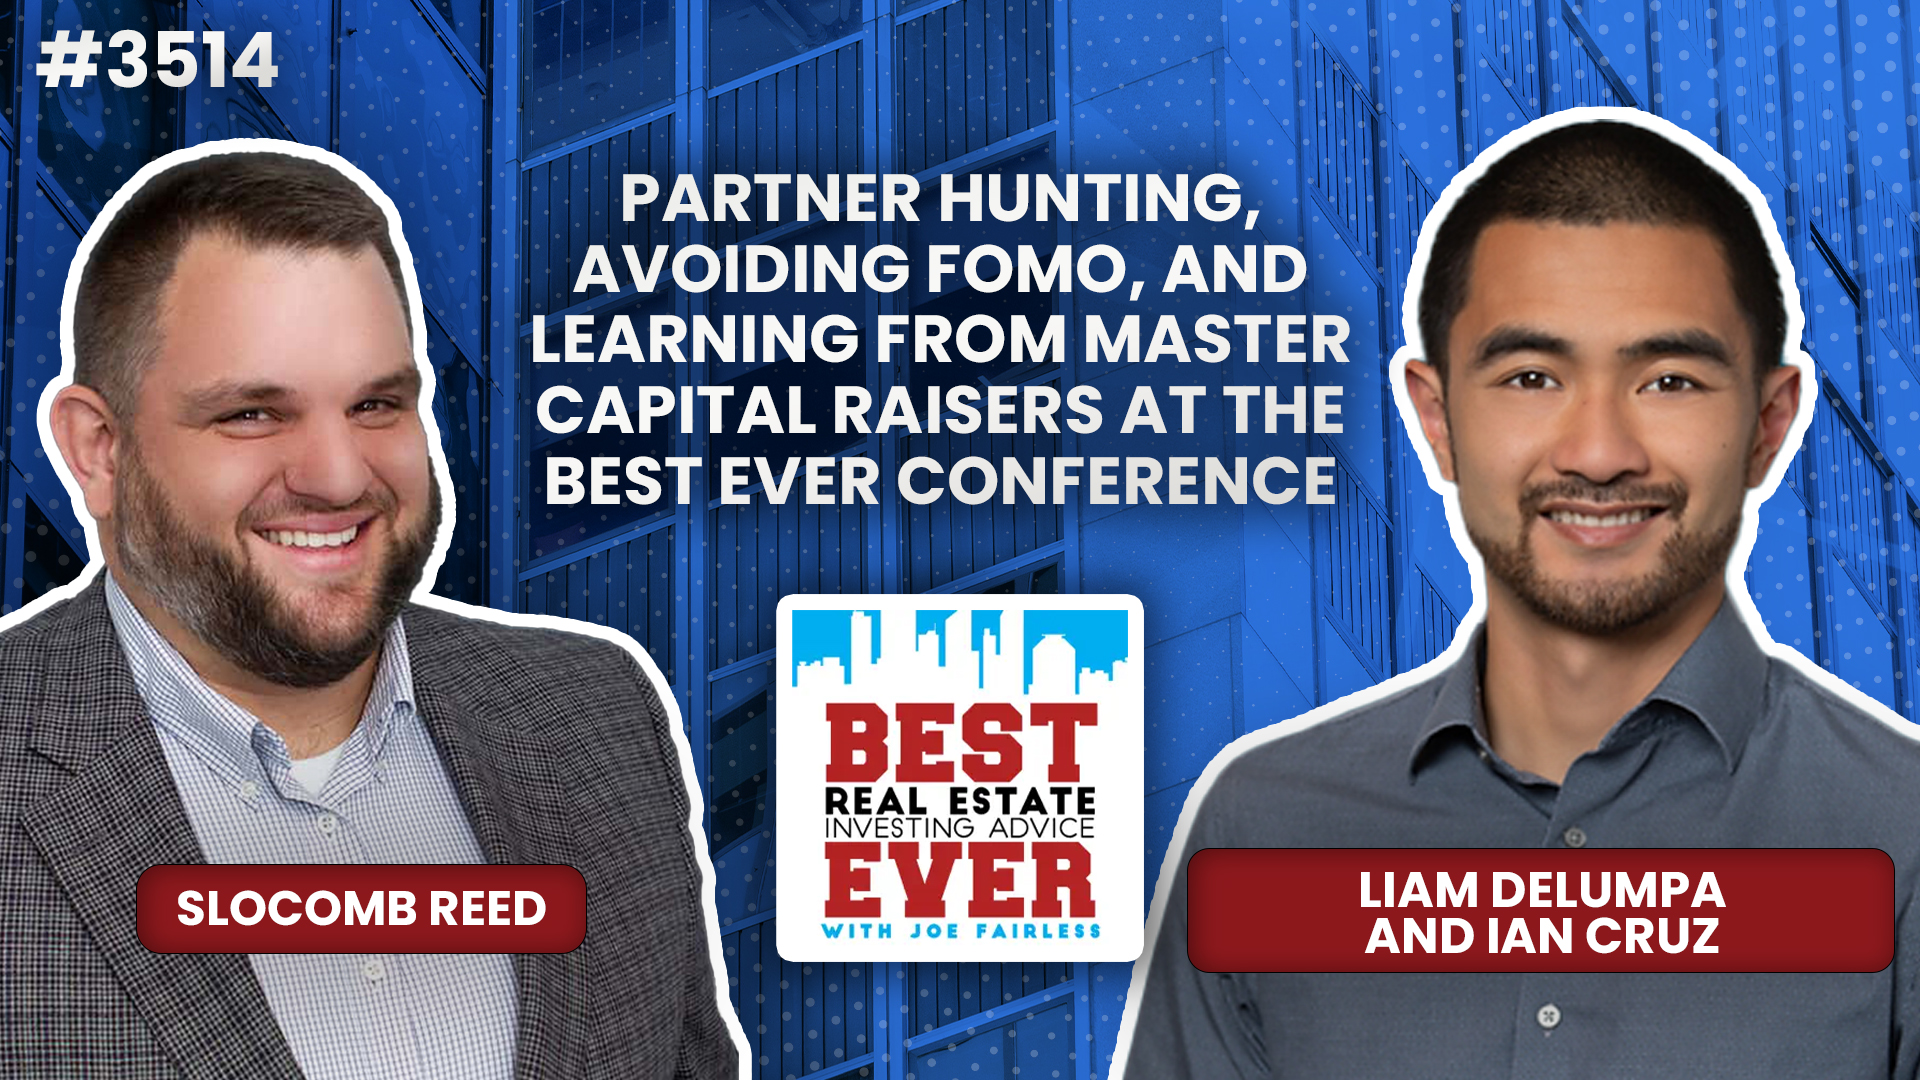 JF3514: Partner Hunting, Avoiding FOMO, and Learning from Master Capital Raisers at the Best Ever Conference ft. Liam Delumpa and Ian Cruz